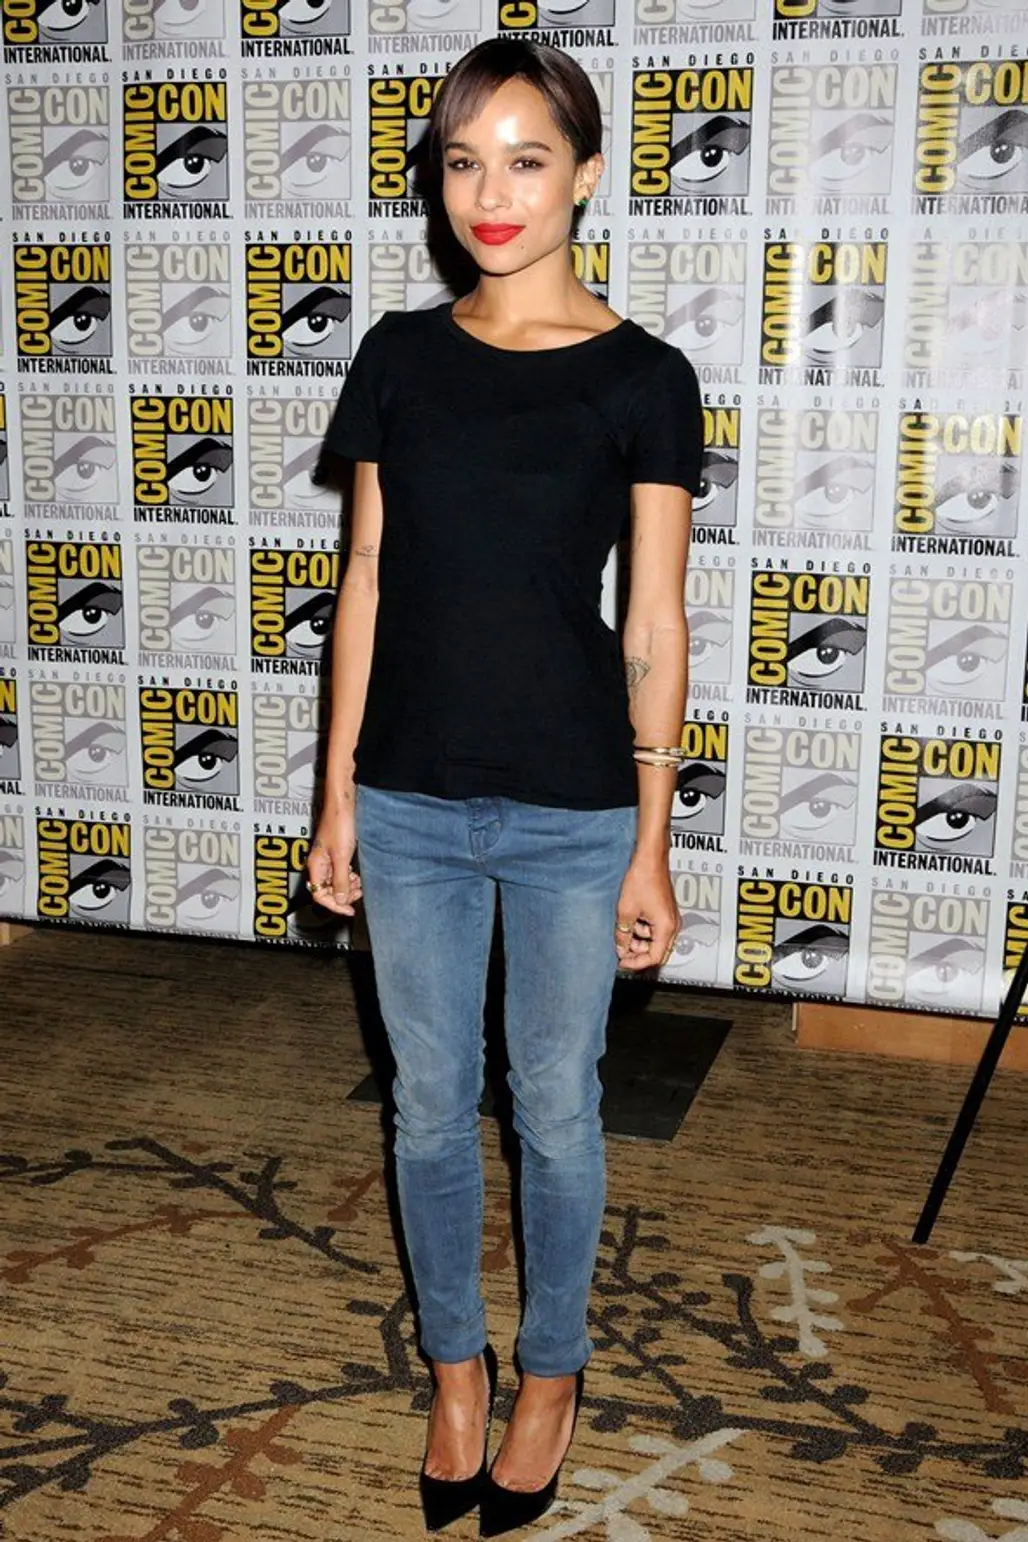 Simply Chic at Comic Con